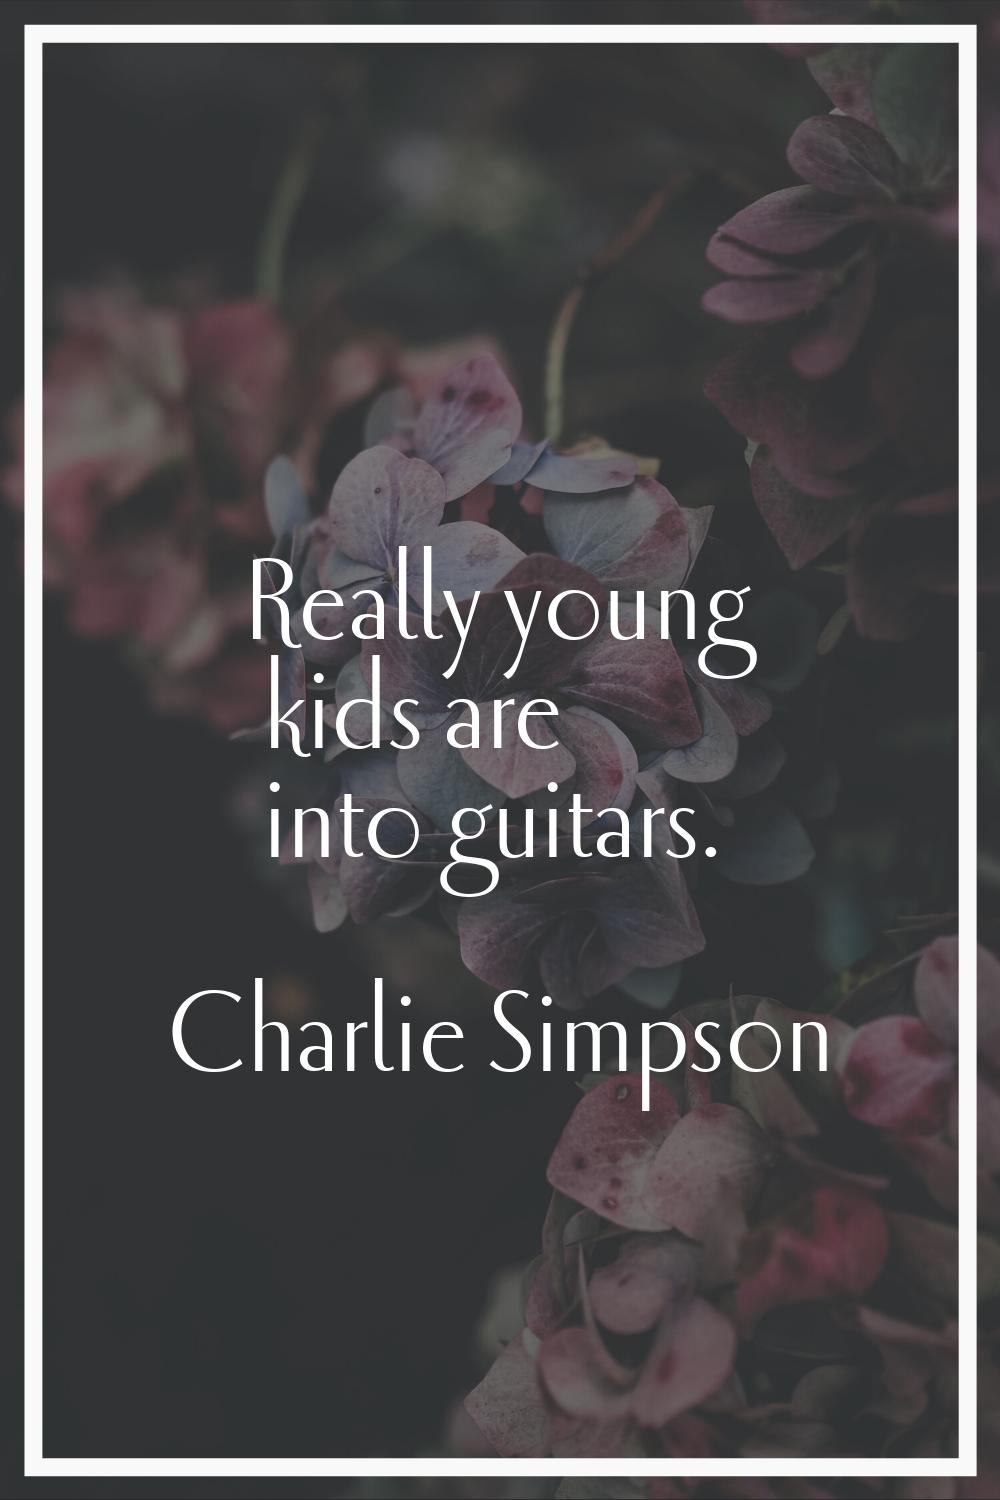 Really young kids are into guitars.